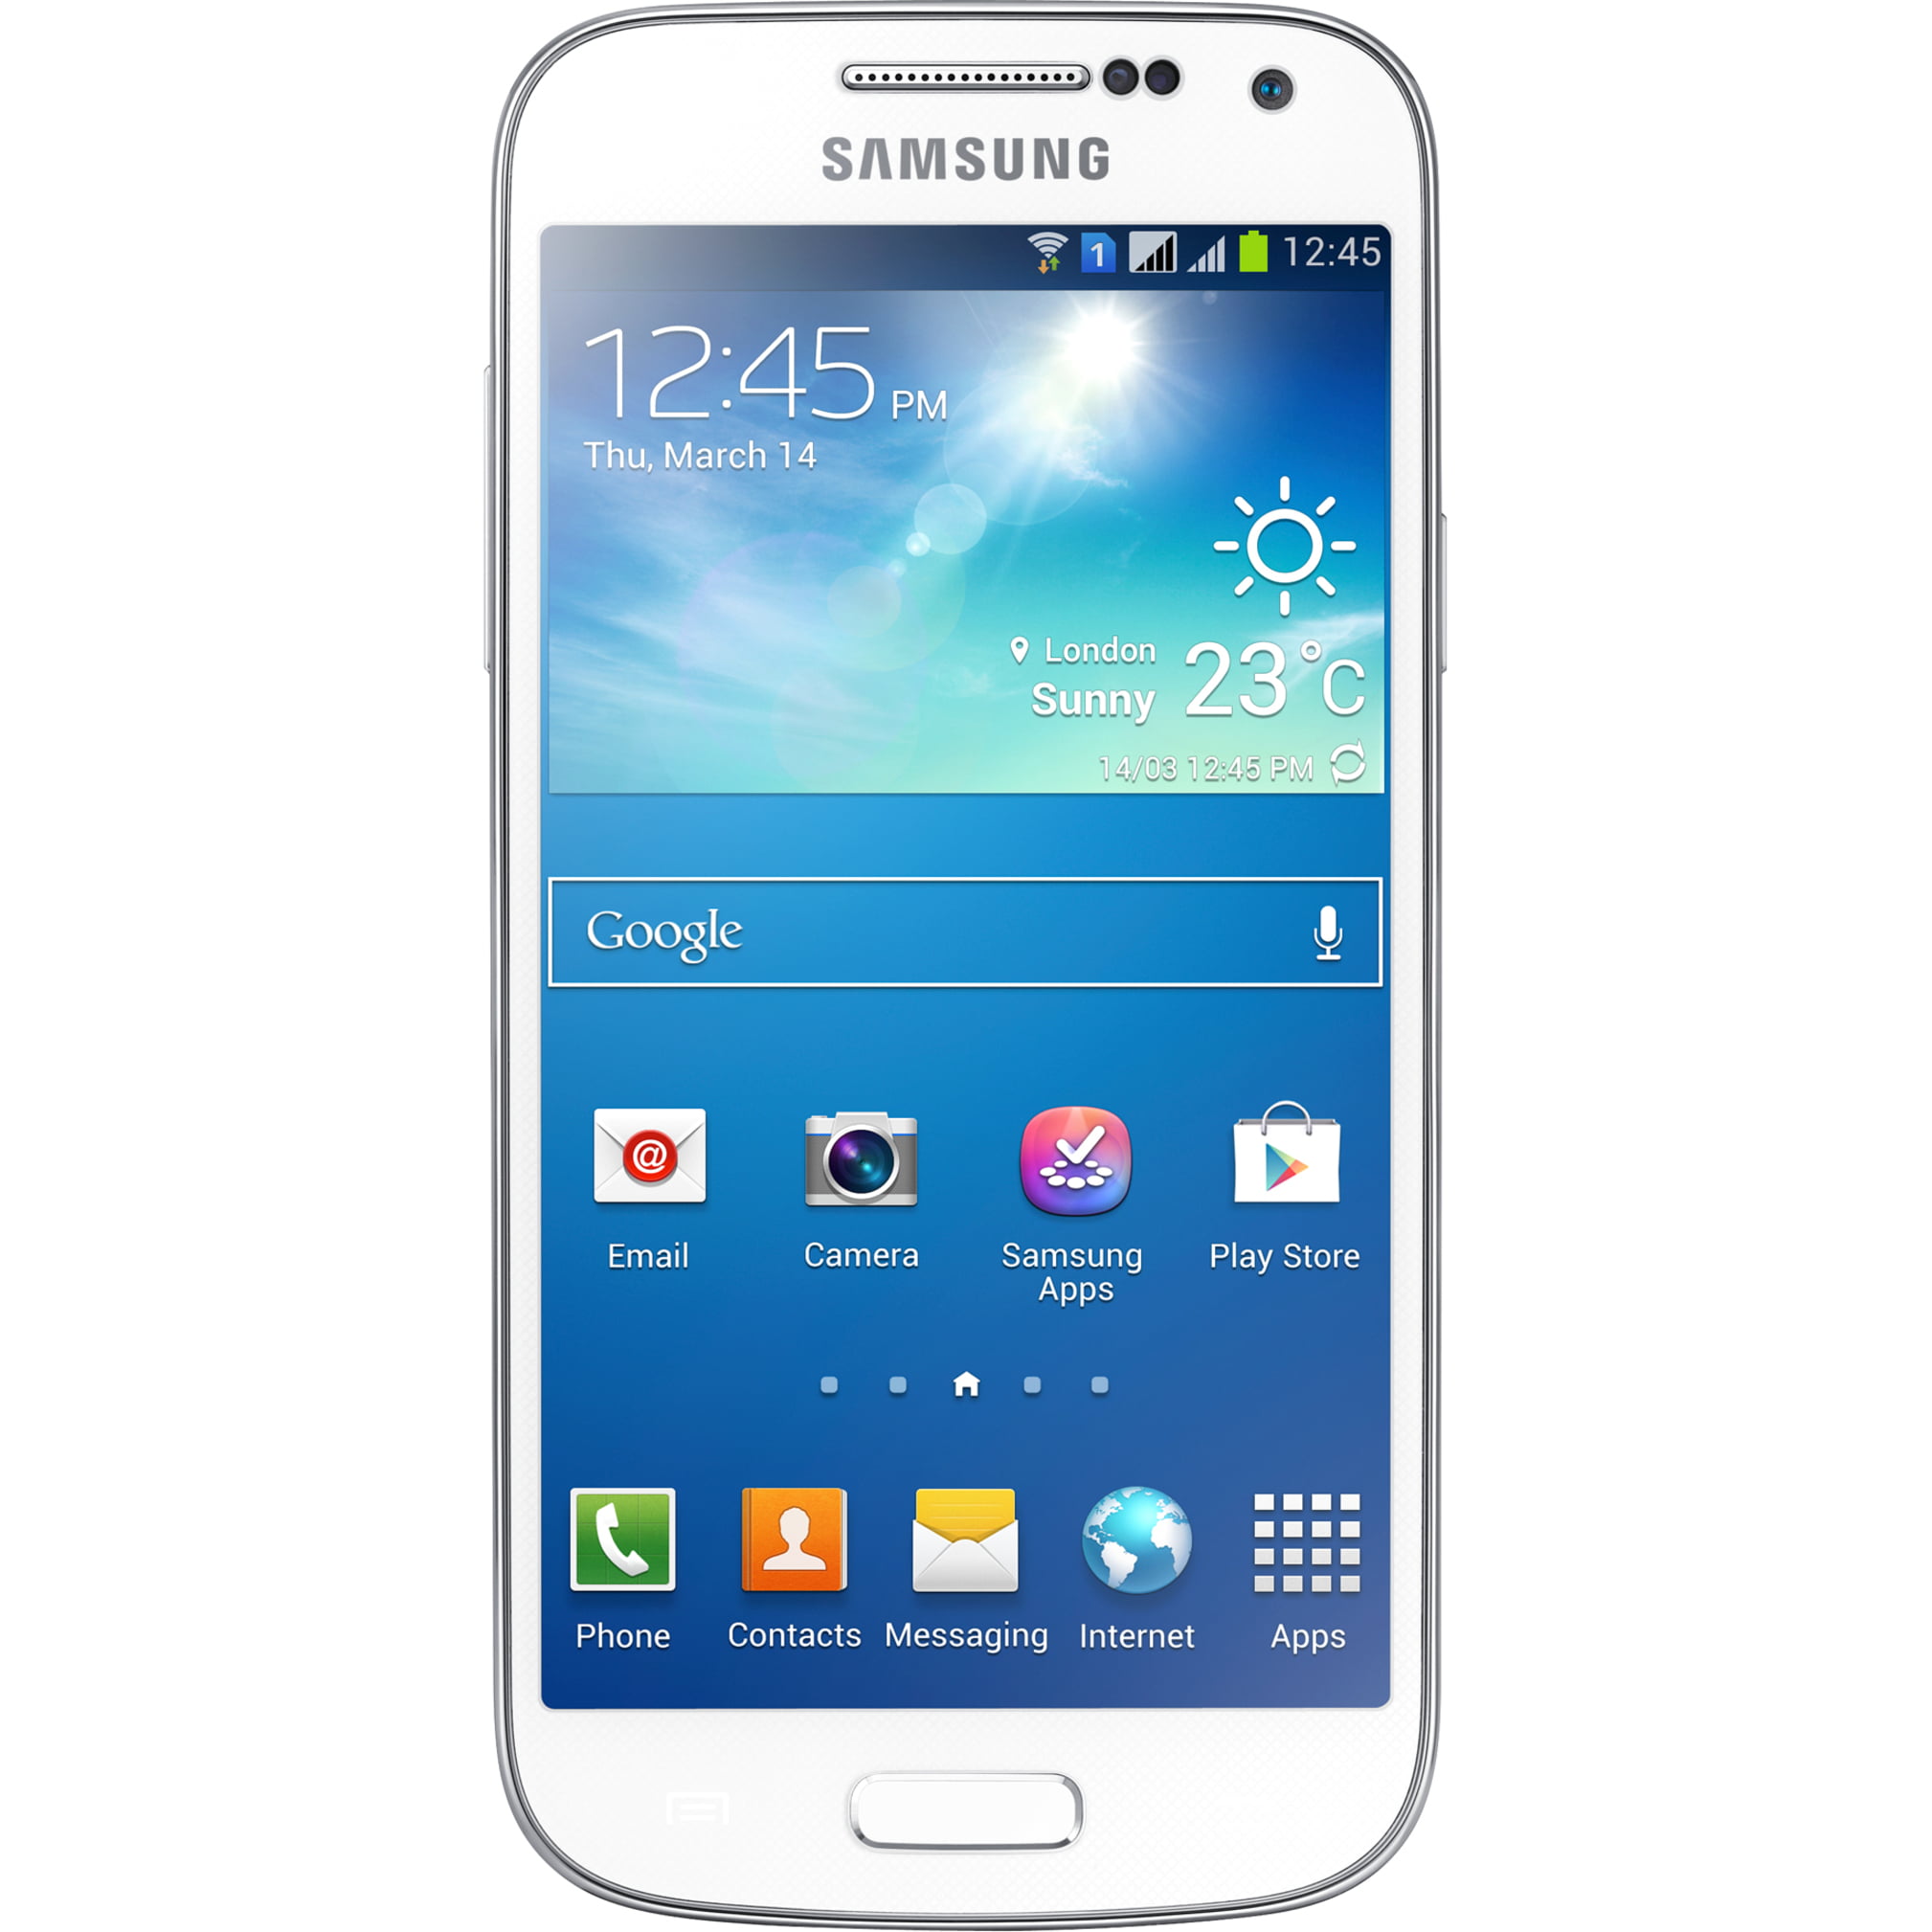 rester Metal linje implicitte Samsung Galaxy S4 Mini Duos GT-I9192 8 GB Smartphone, 4.3" LCD 540 x 960,  1.50 GB RAM, Android 4.2.2 Jelly Bean, 3.9G, White - Walmart.com